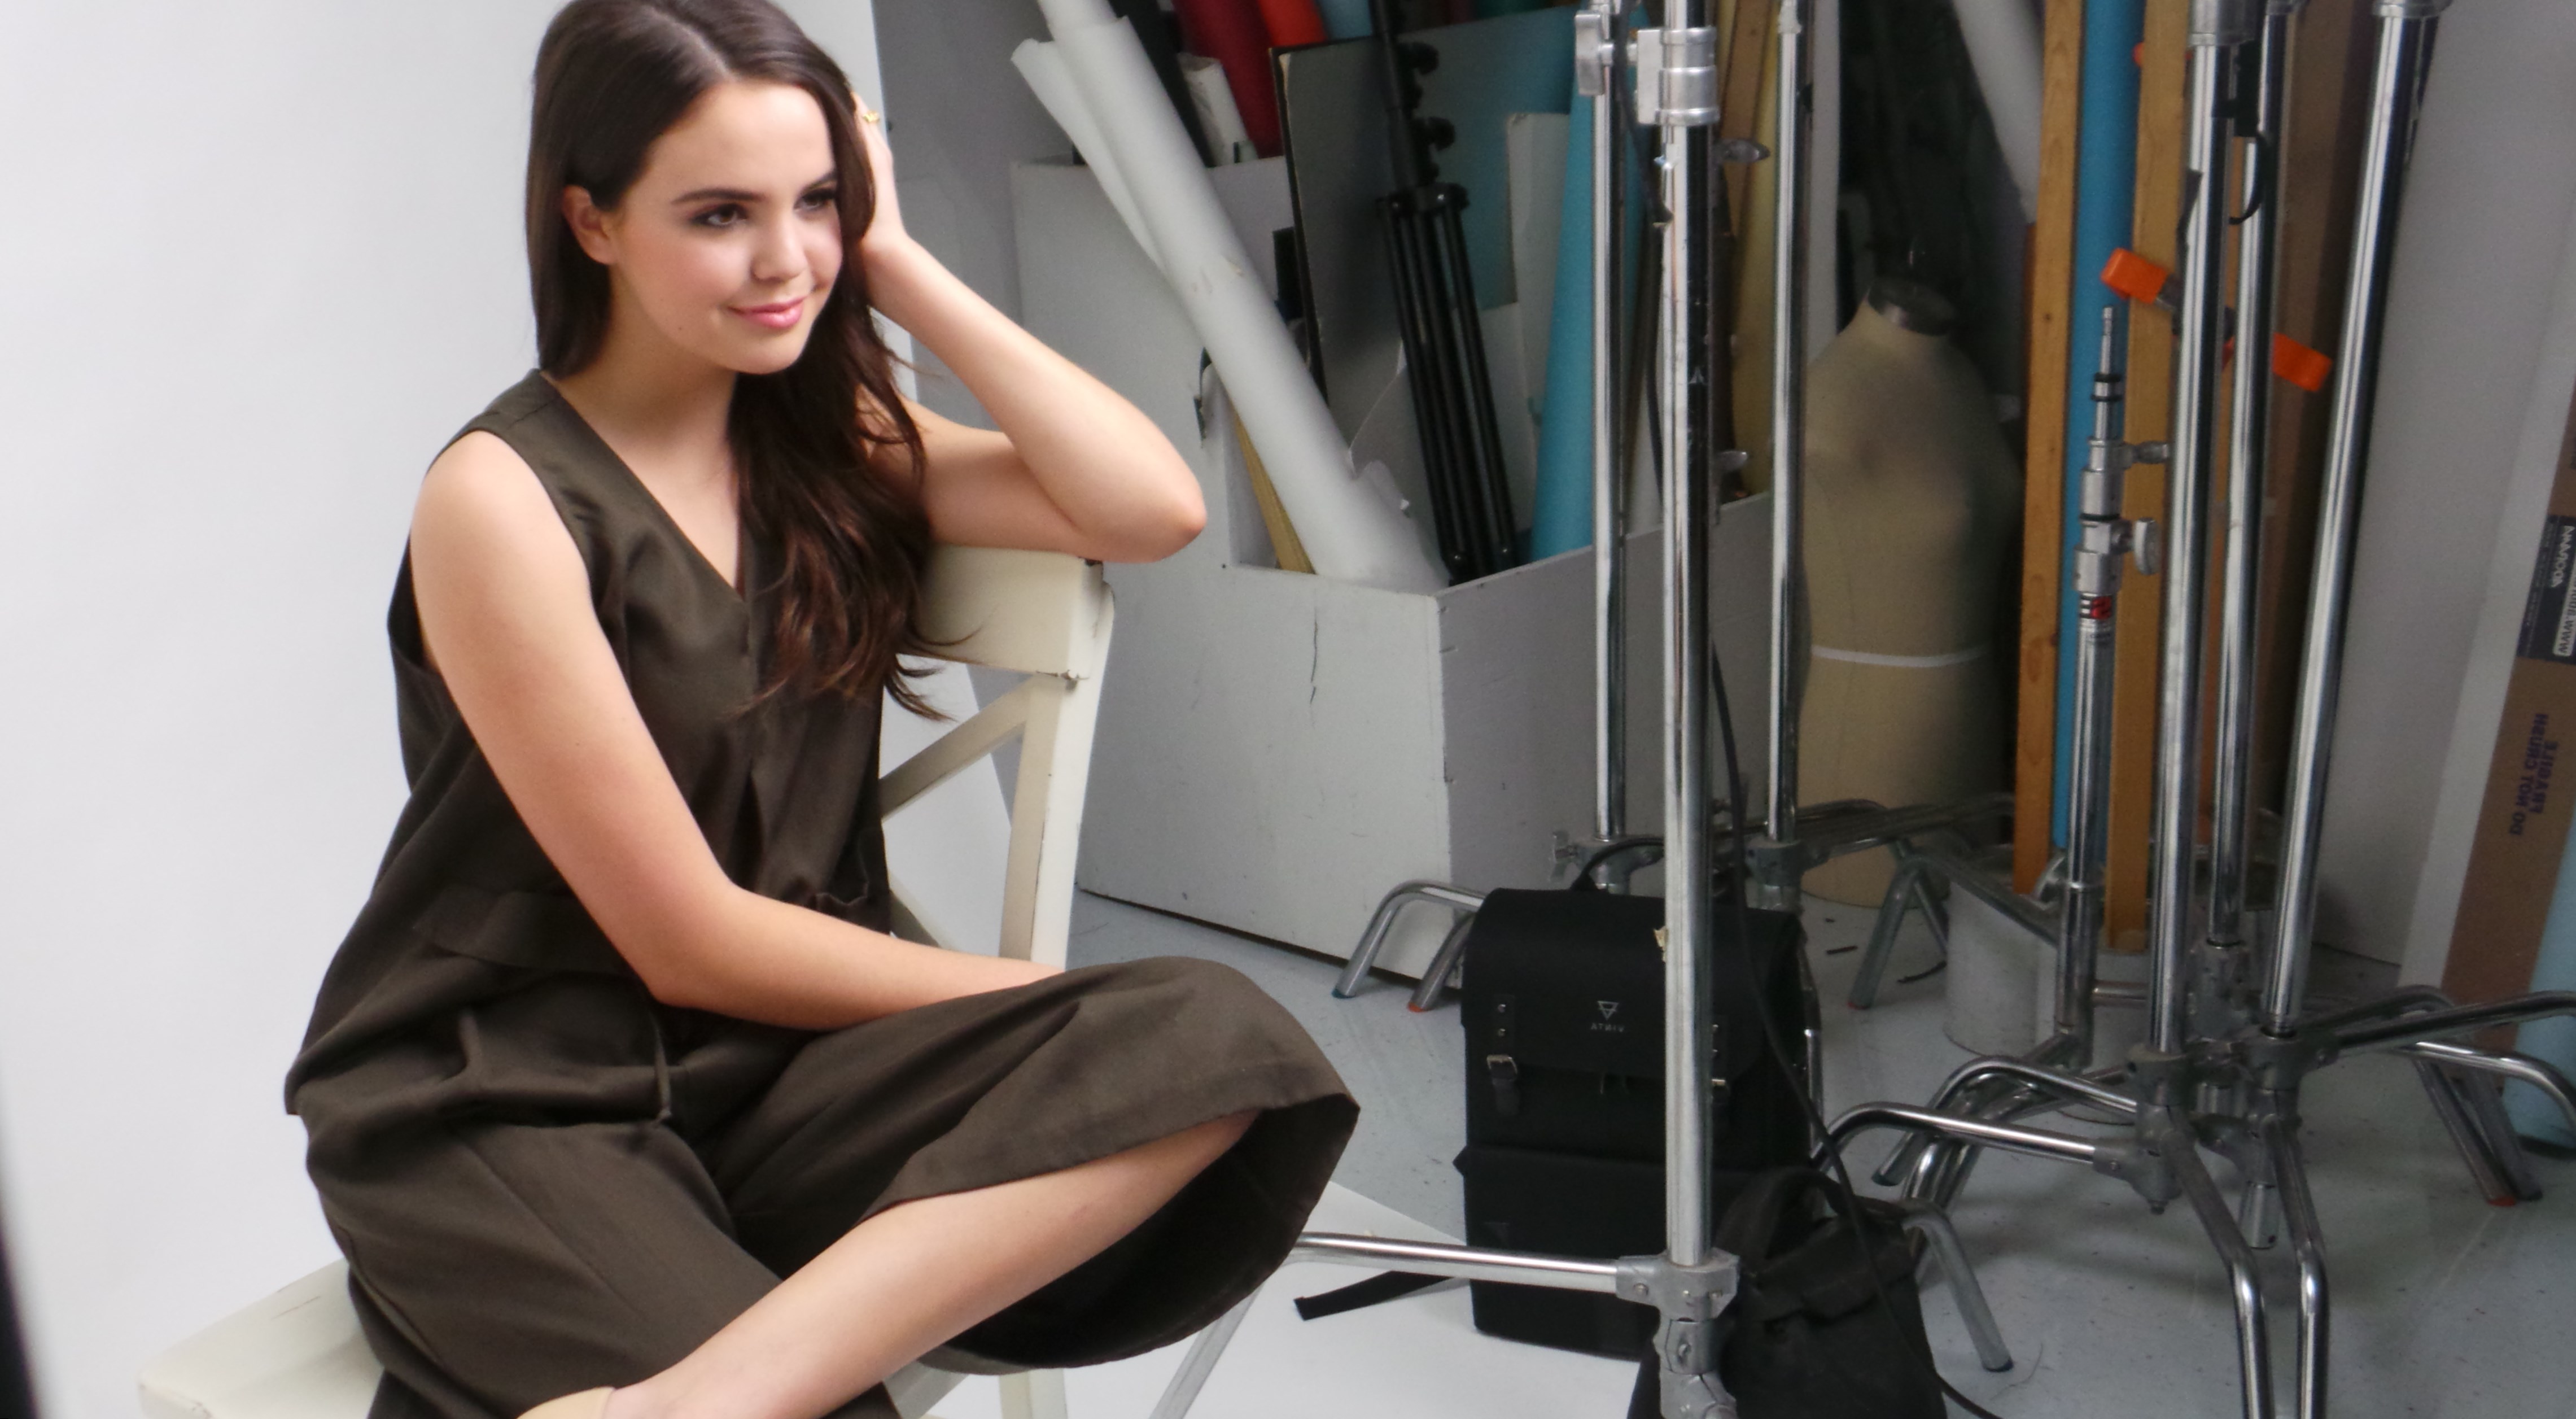 Bailee Madison  Height, Weight and Body Measurements